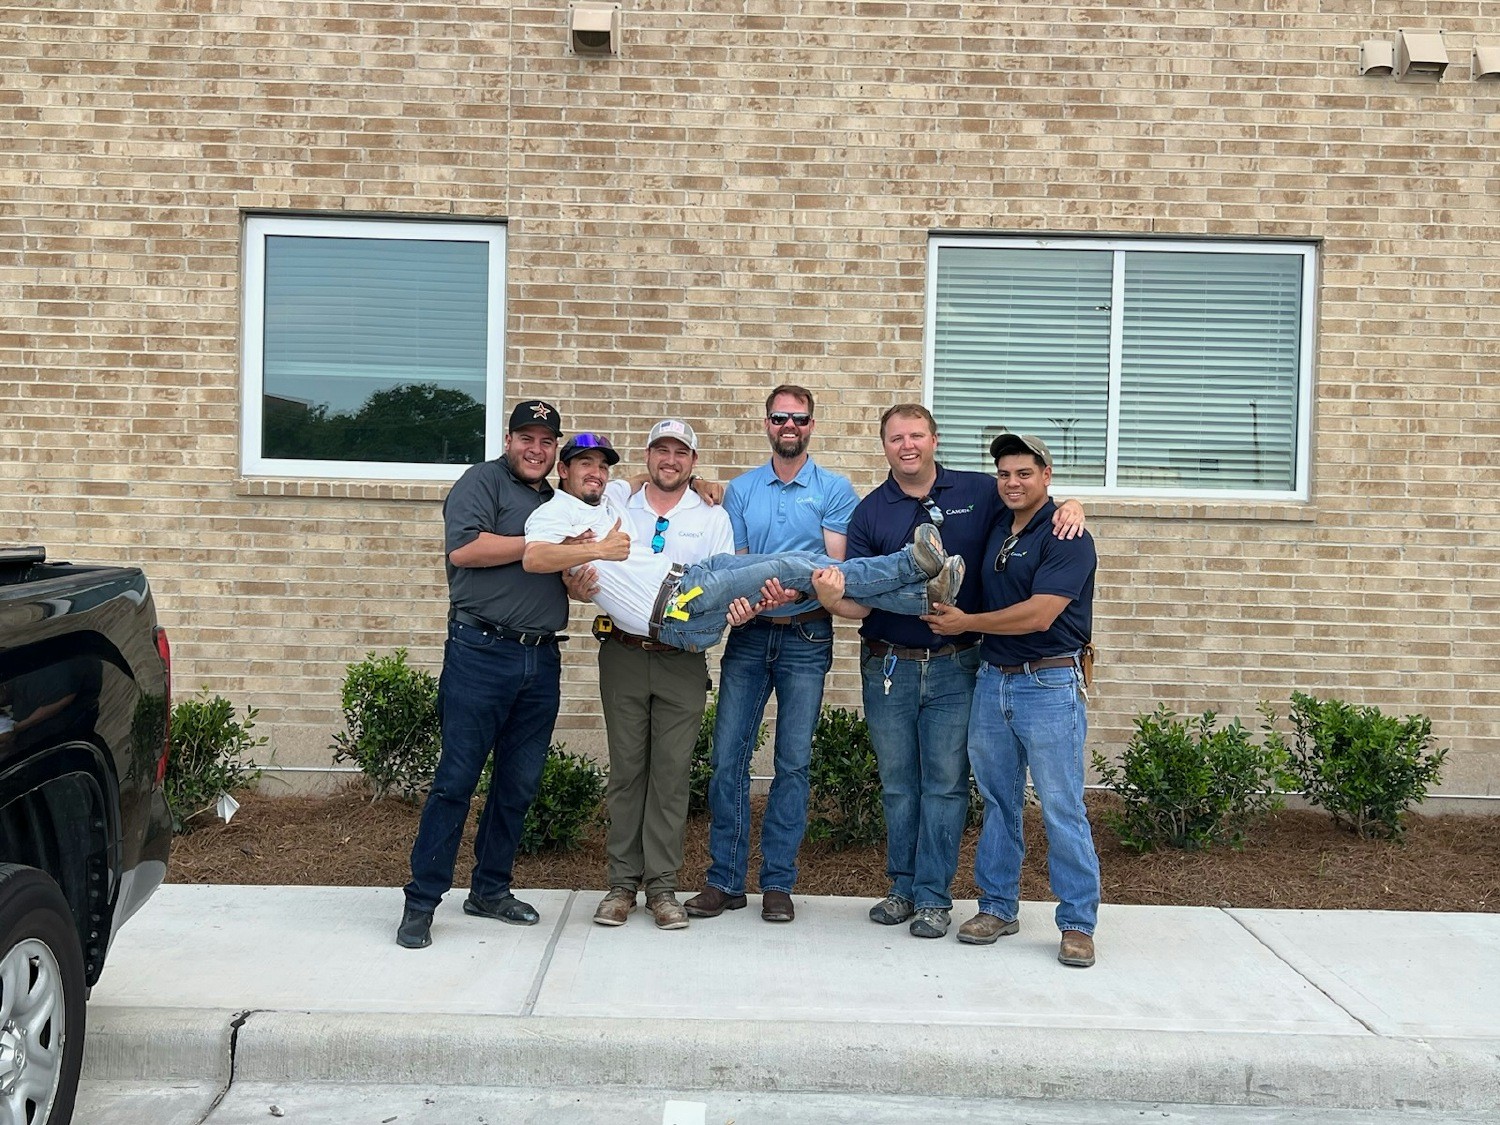 Camden's Construction team displaying the Camden value of Have Fun!